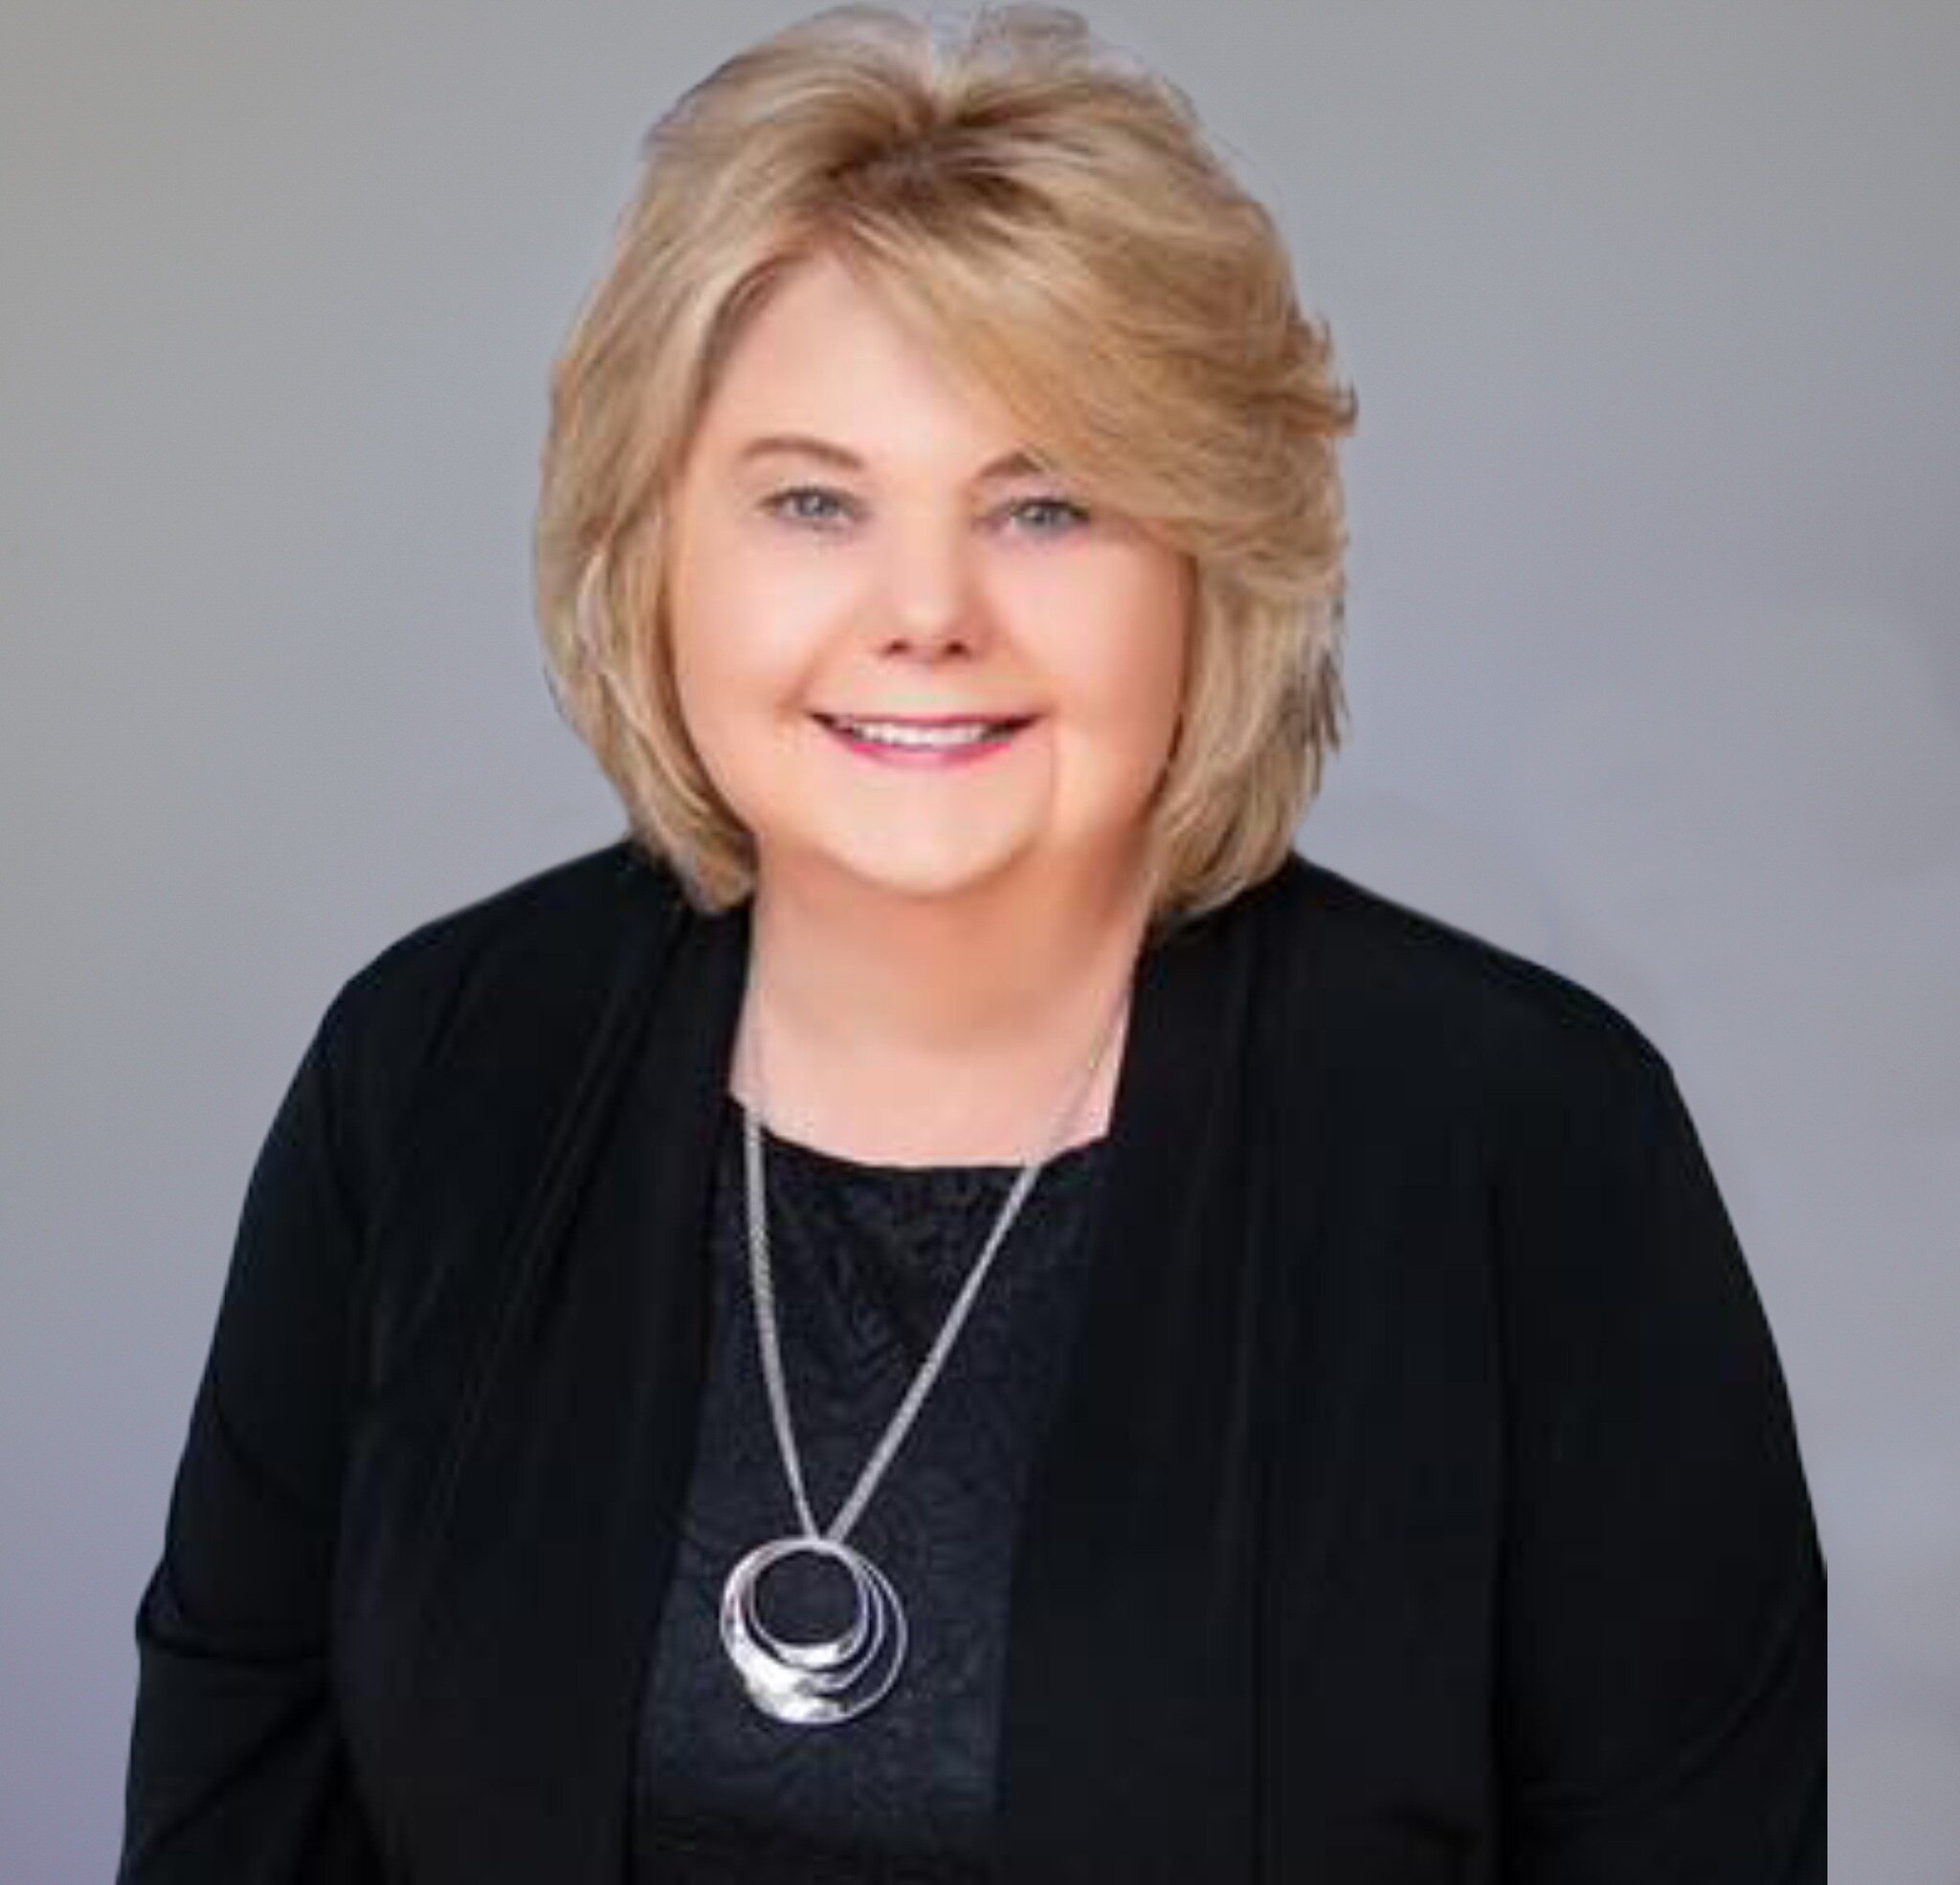 Meet Pati Michels! Our customer service representative here at Bradley Insurance. 

Pati is originally from Georgia but has been a resident of Cleveland since 2006. She worked at the Church of God headquarters for many years and retired recently but 